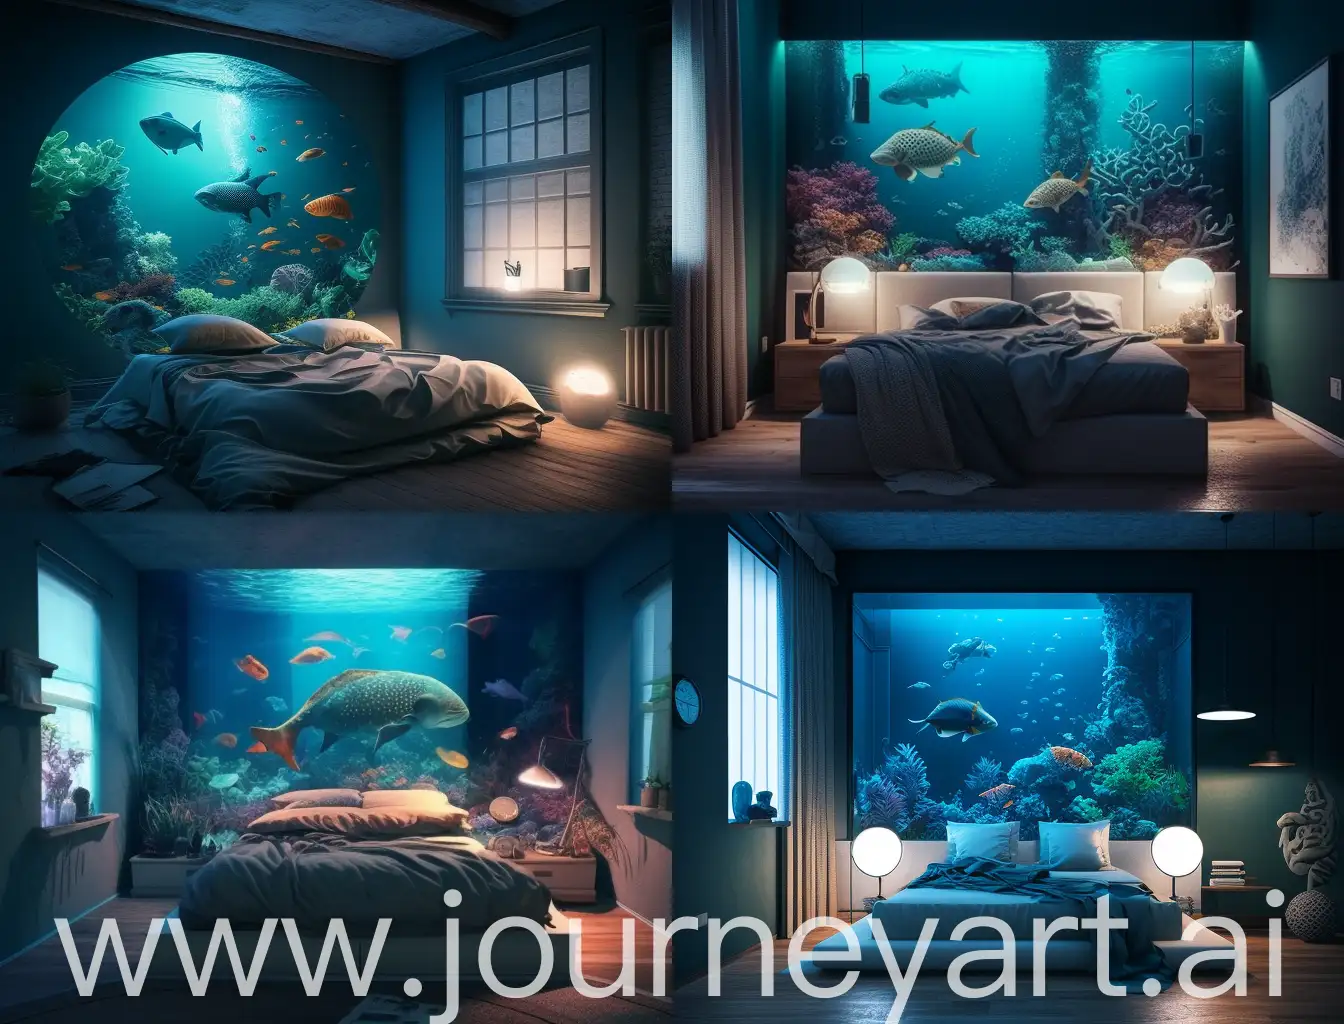 Serenity-in-Night-Modern-Bedroom-with-a-Captivating-Aquarium-Wall